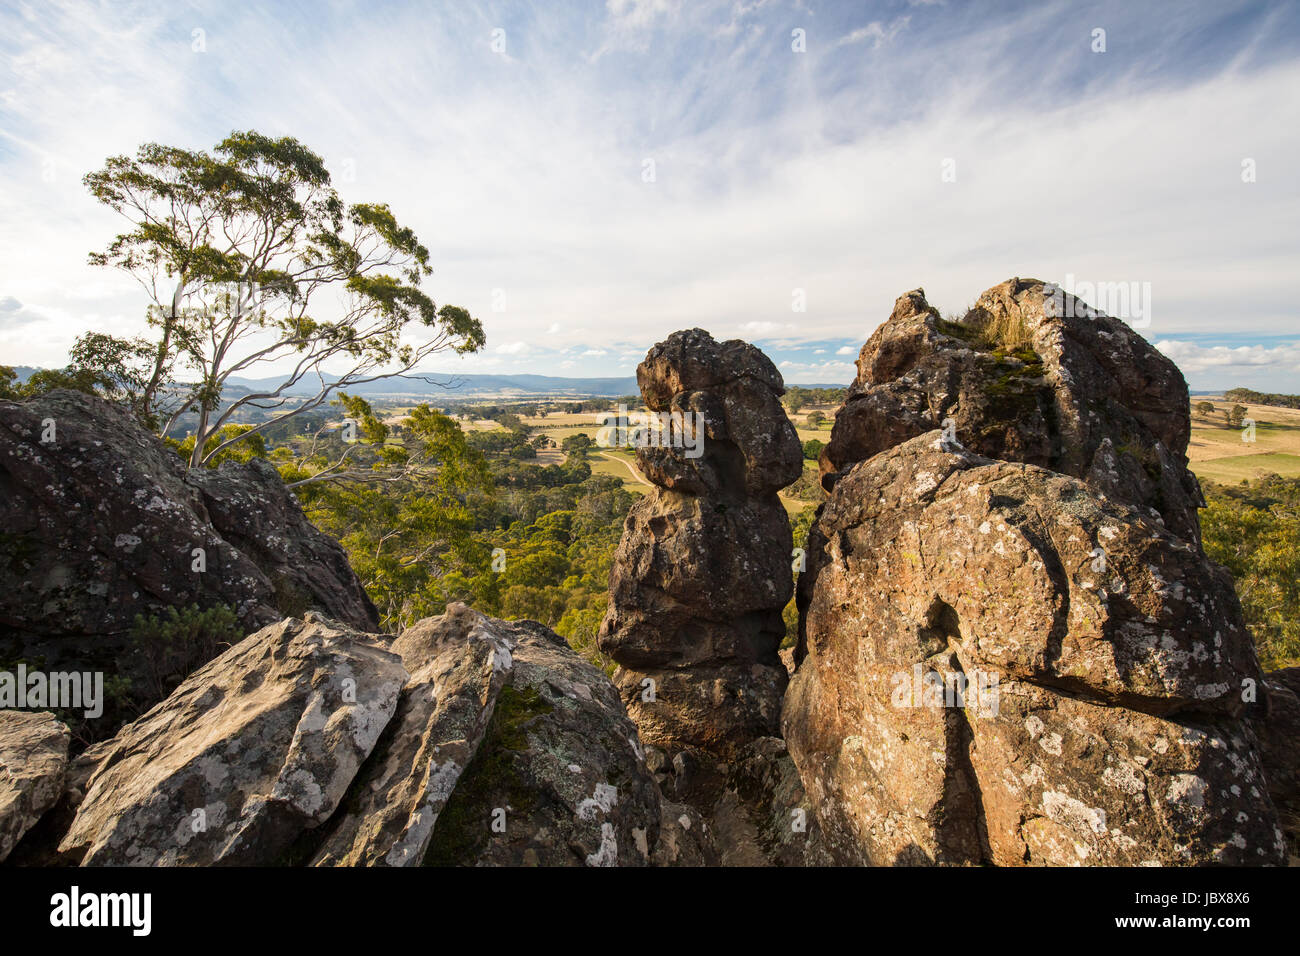 The popular tourist attraction of Hanging Rock. A volcanic group of rocks atop a hill in the Macedon ranges, Victoria, Australia Stock Photo